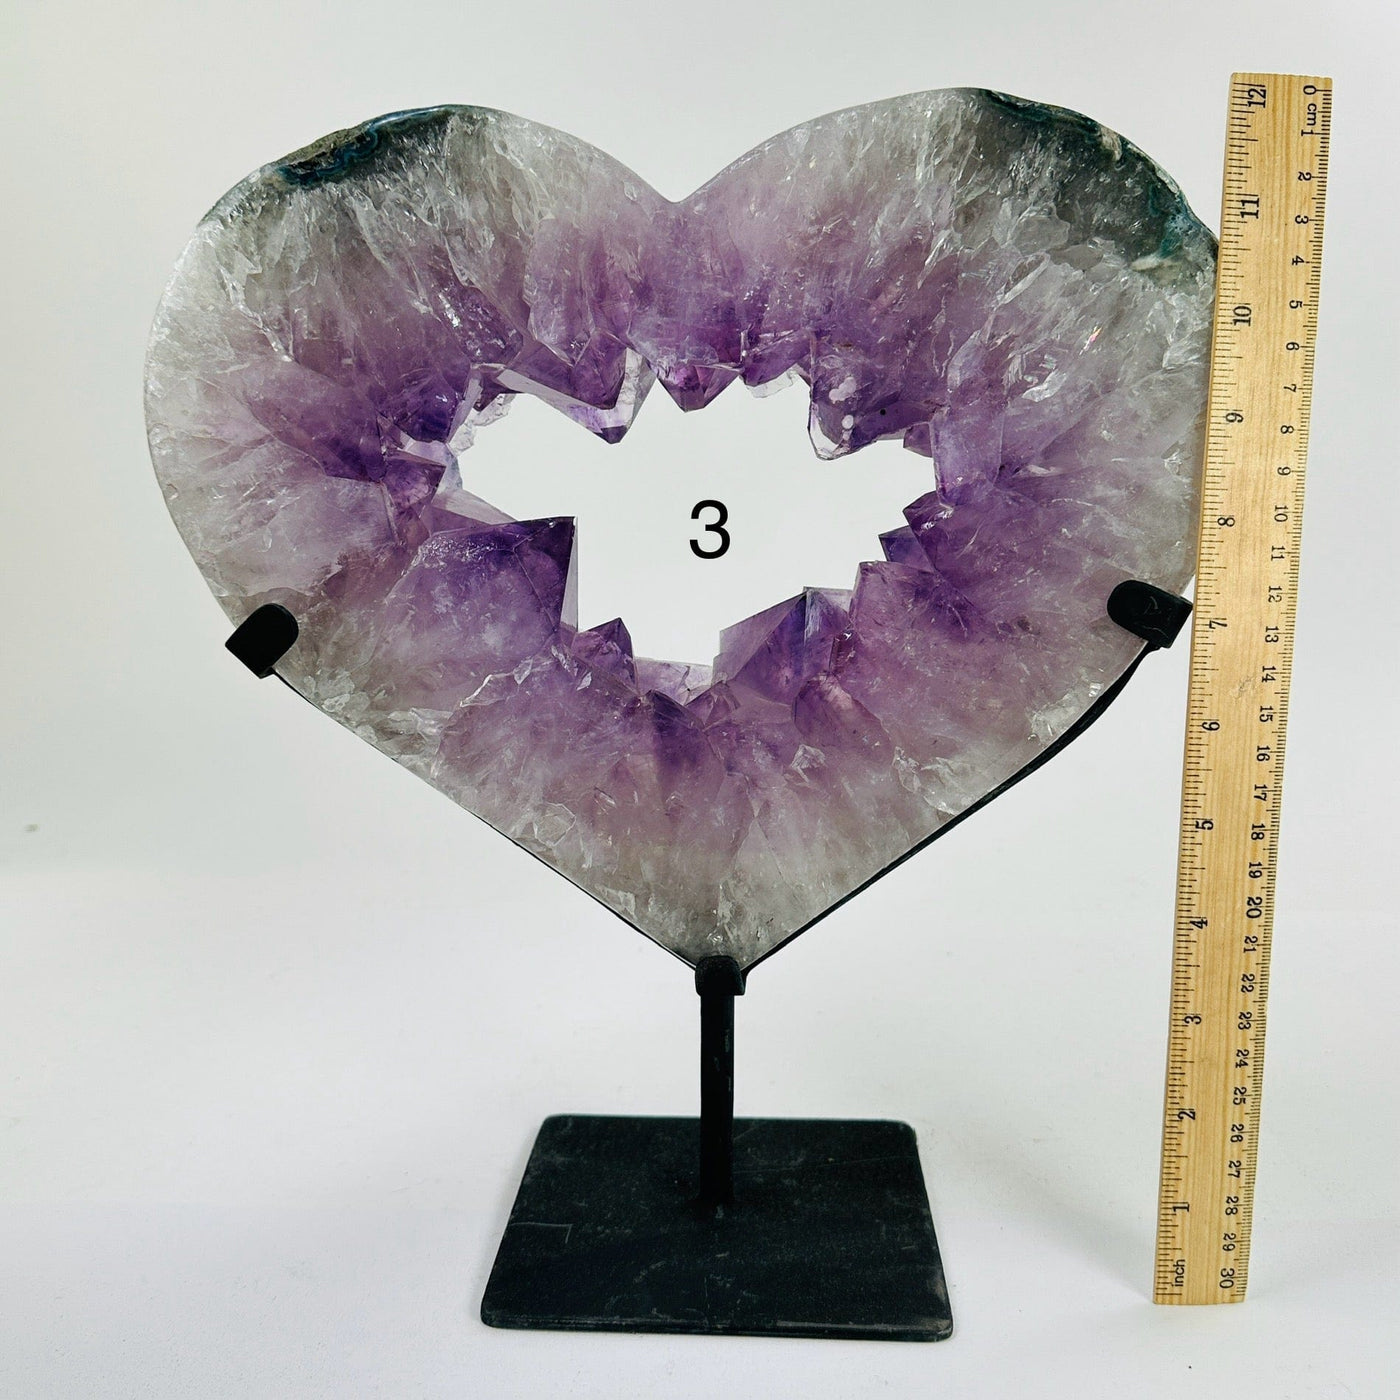 amethyst heart on stand next to a ruler for size reference